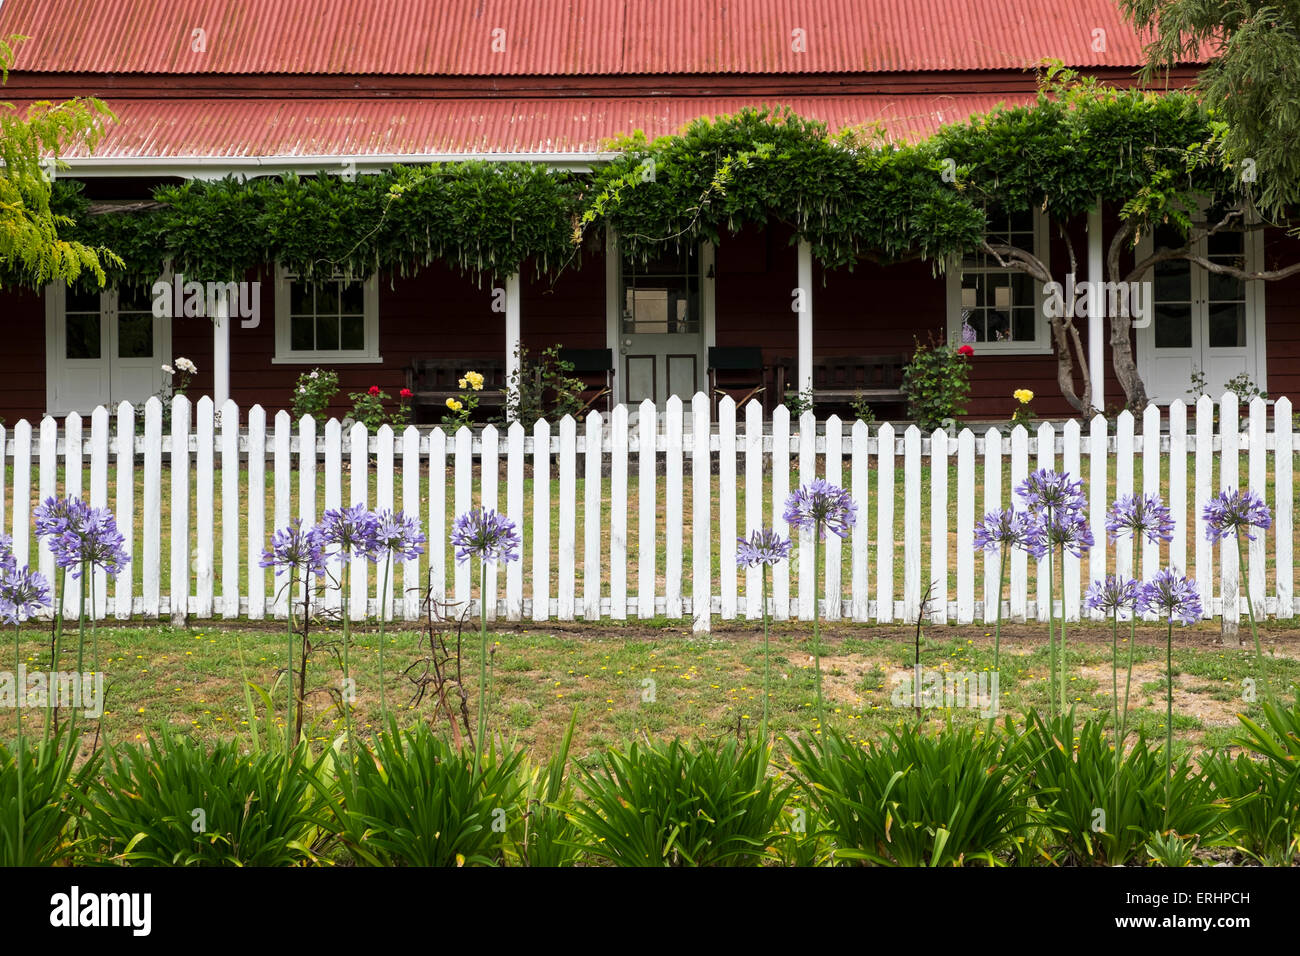 Detail of a tin roofed house with porch, white picket fence and agapanthus flowers, New Zealand. Stock Photo